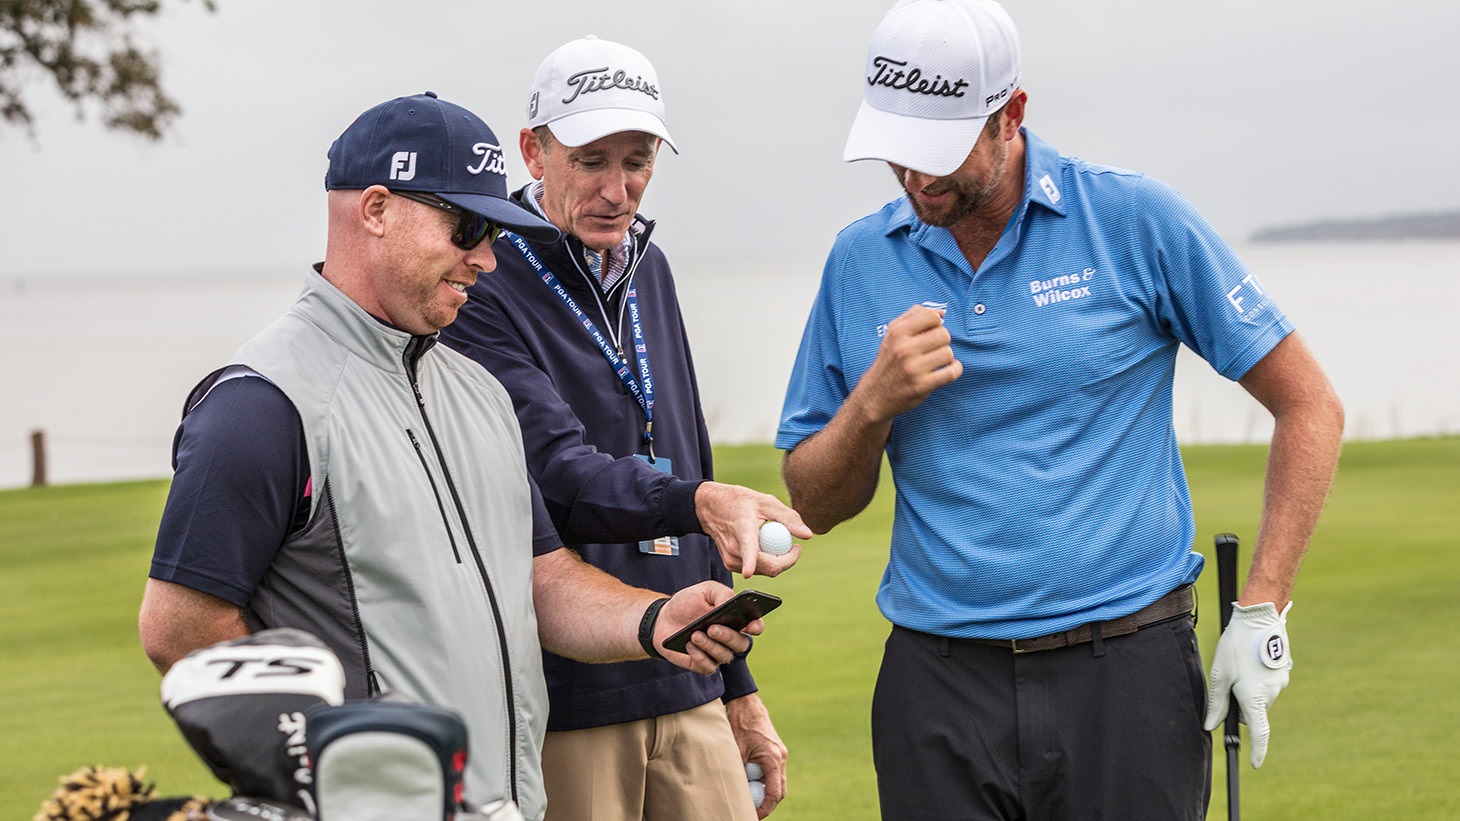 JJ Van Wiesenbeeck, Fordie Pitts and Webb Simpson discuss launch data during a golf ball fitting session at the 2019 RSM Classic